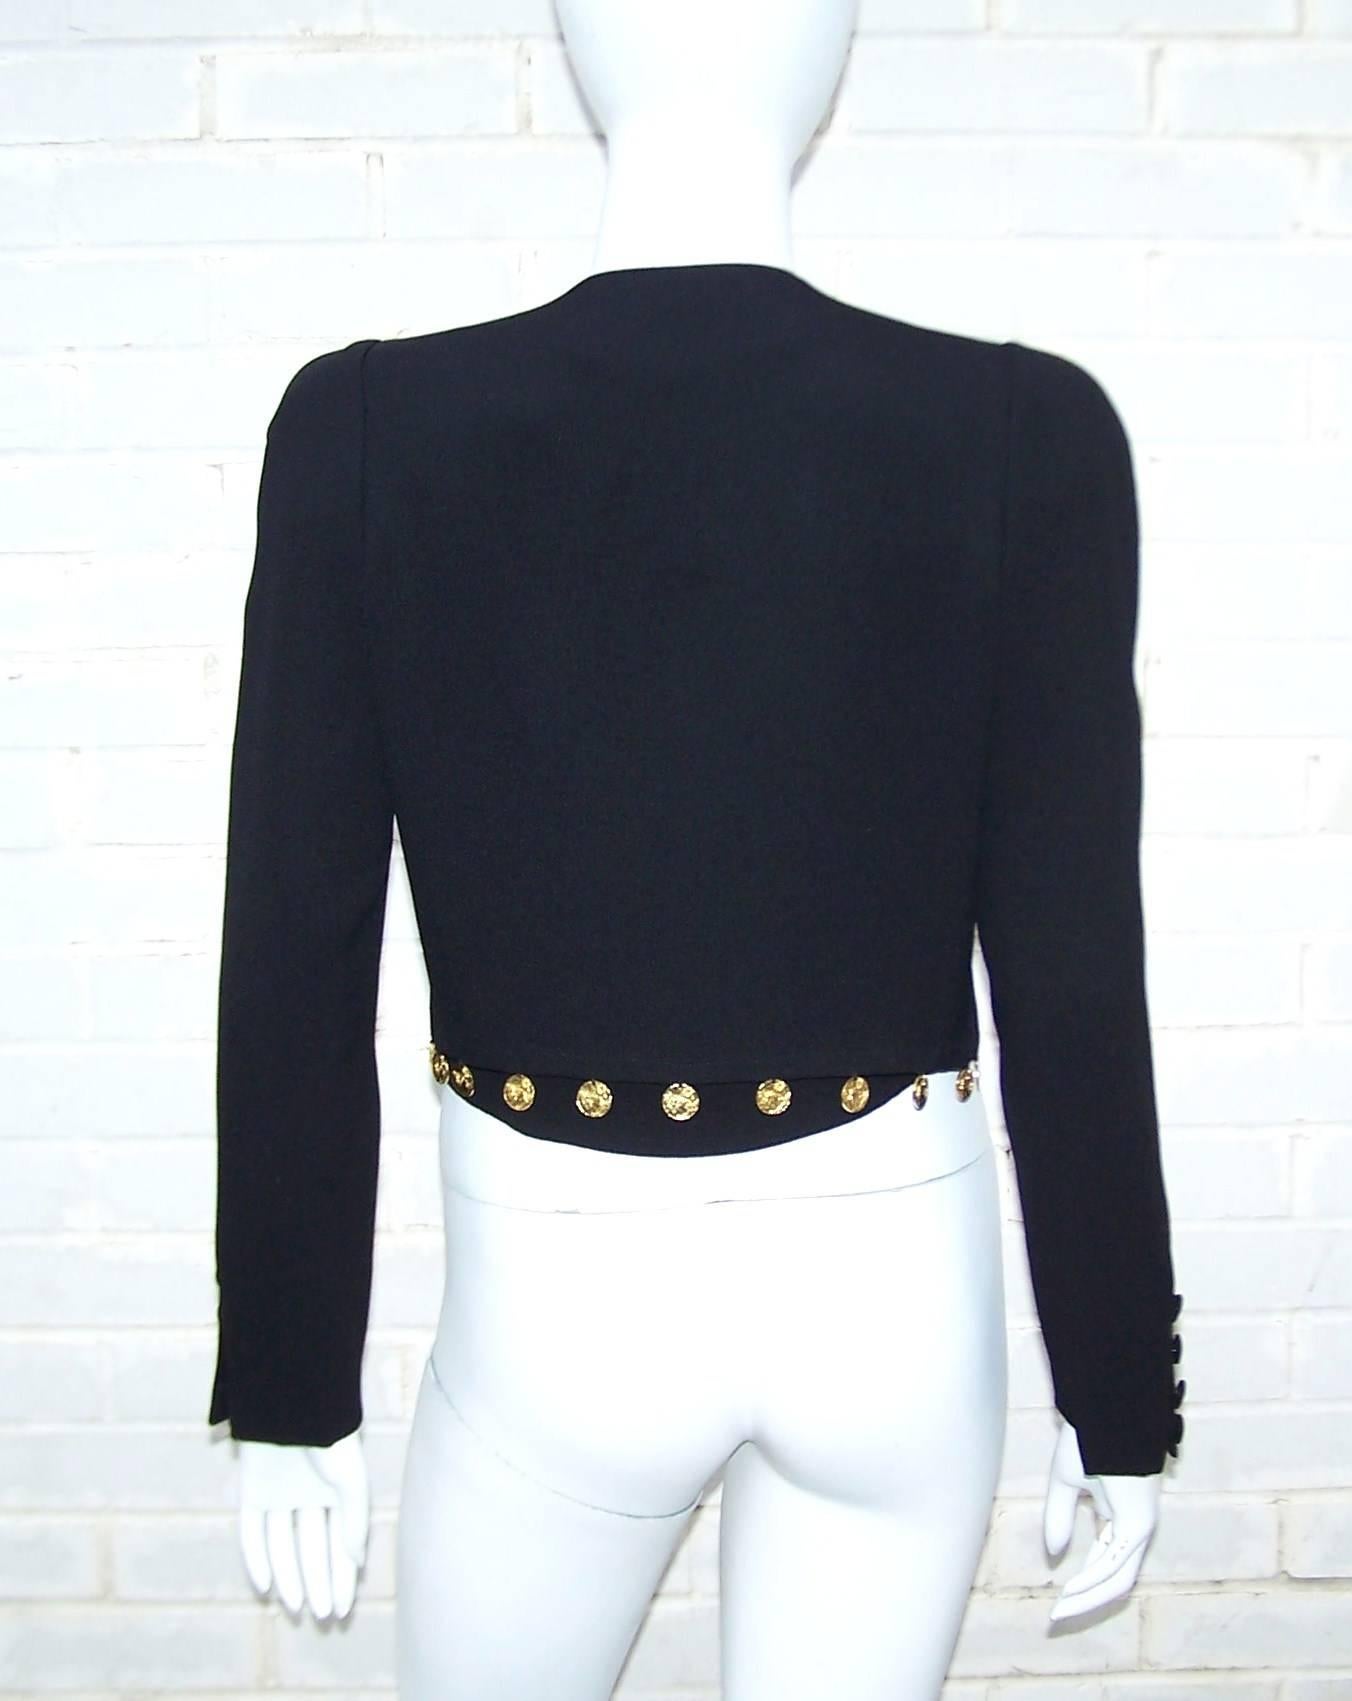 Women's 1980's Sonia Rykiel Black Crepe Coin Embellished Jacket With Matching Shell